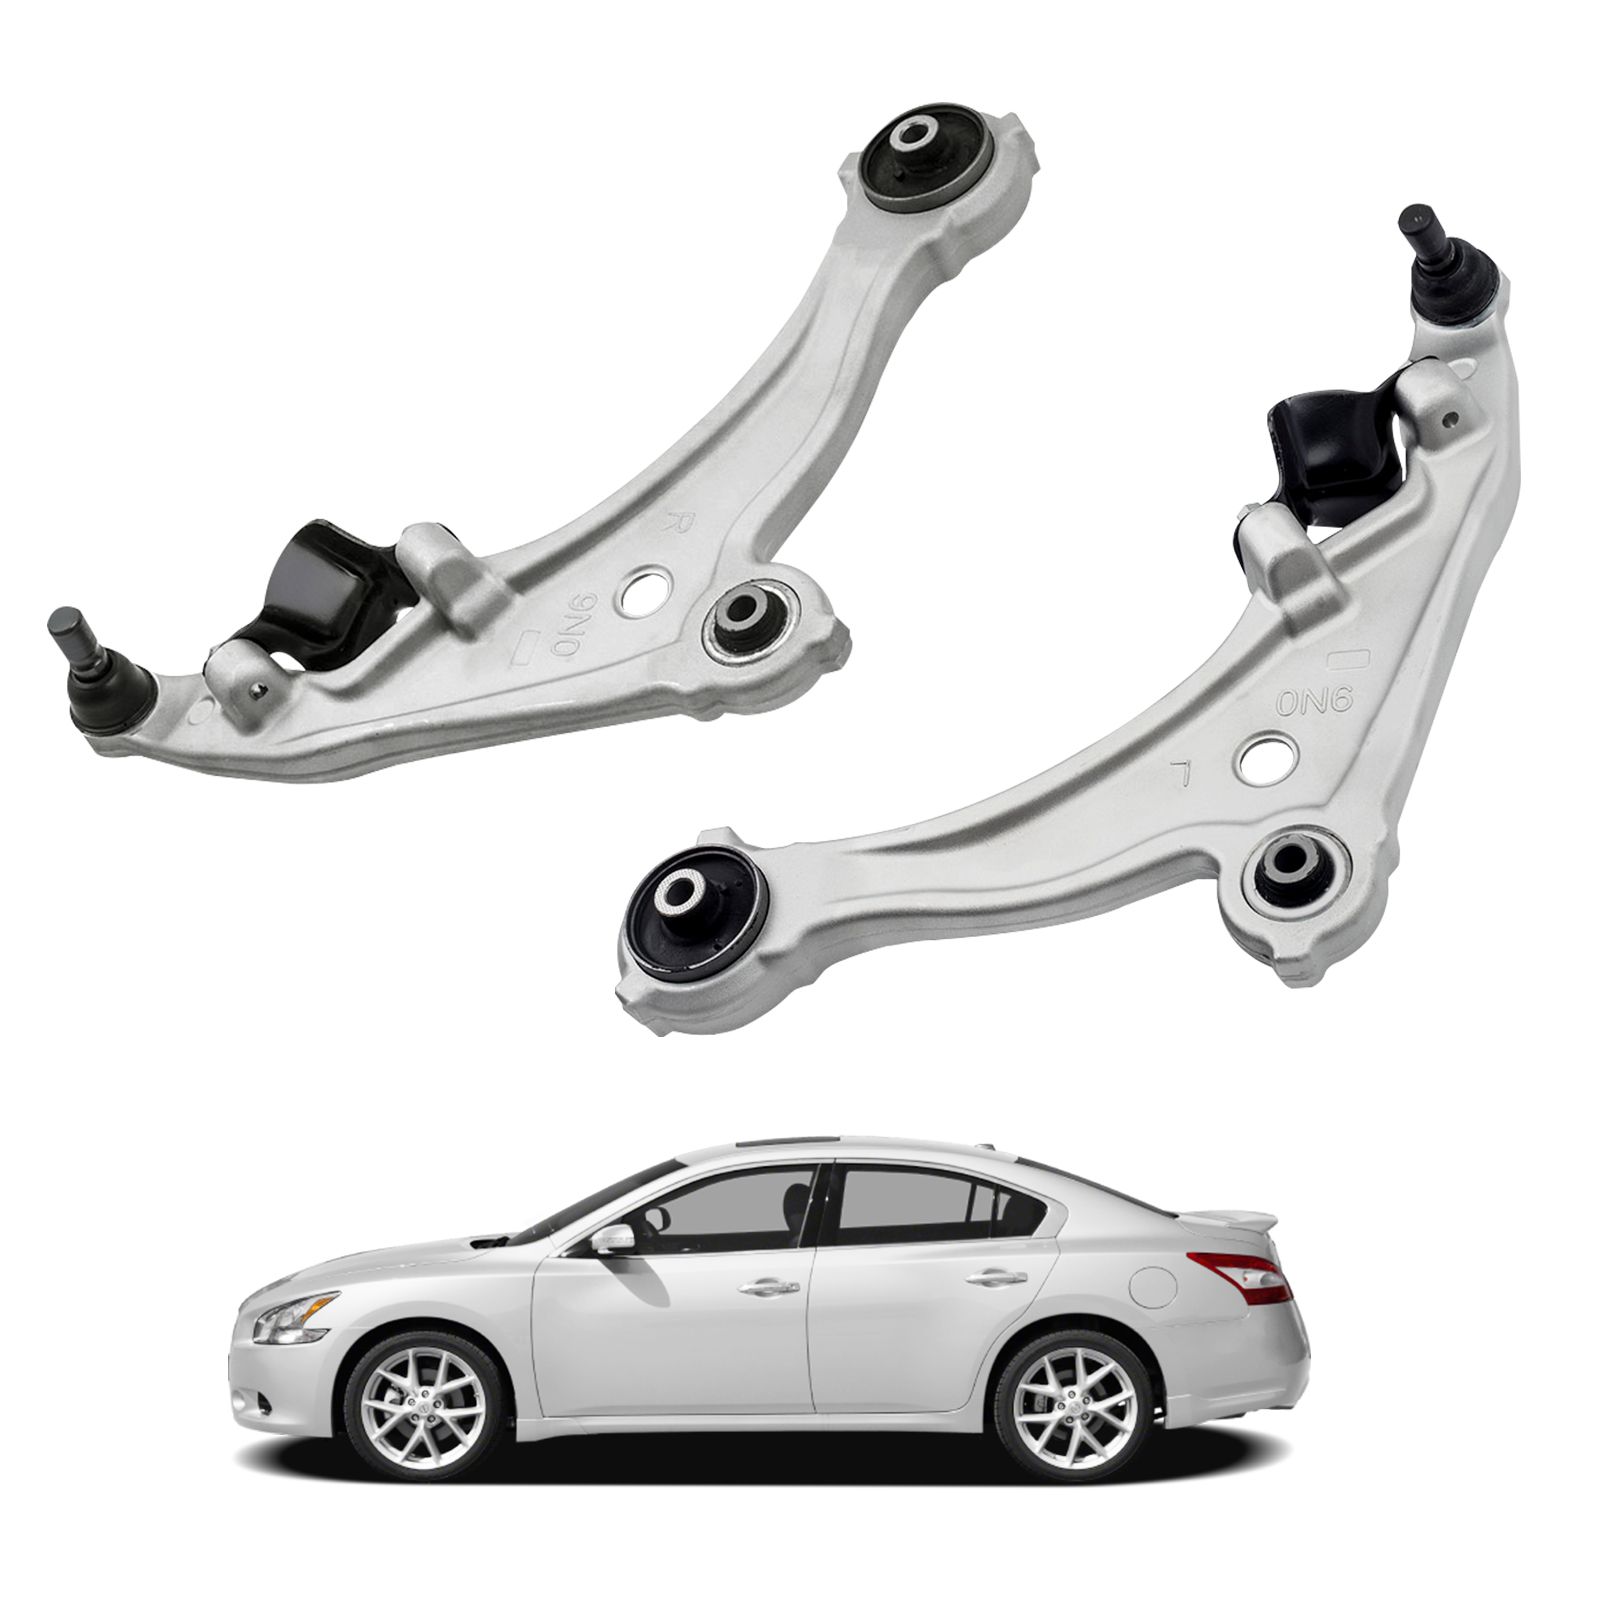 Front Lower Control Arms